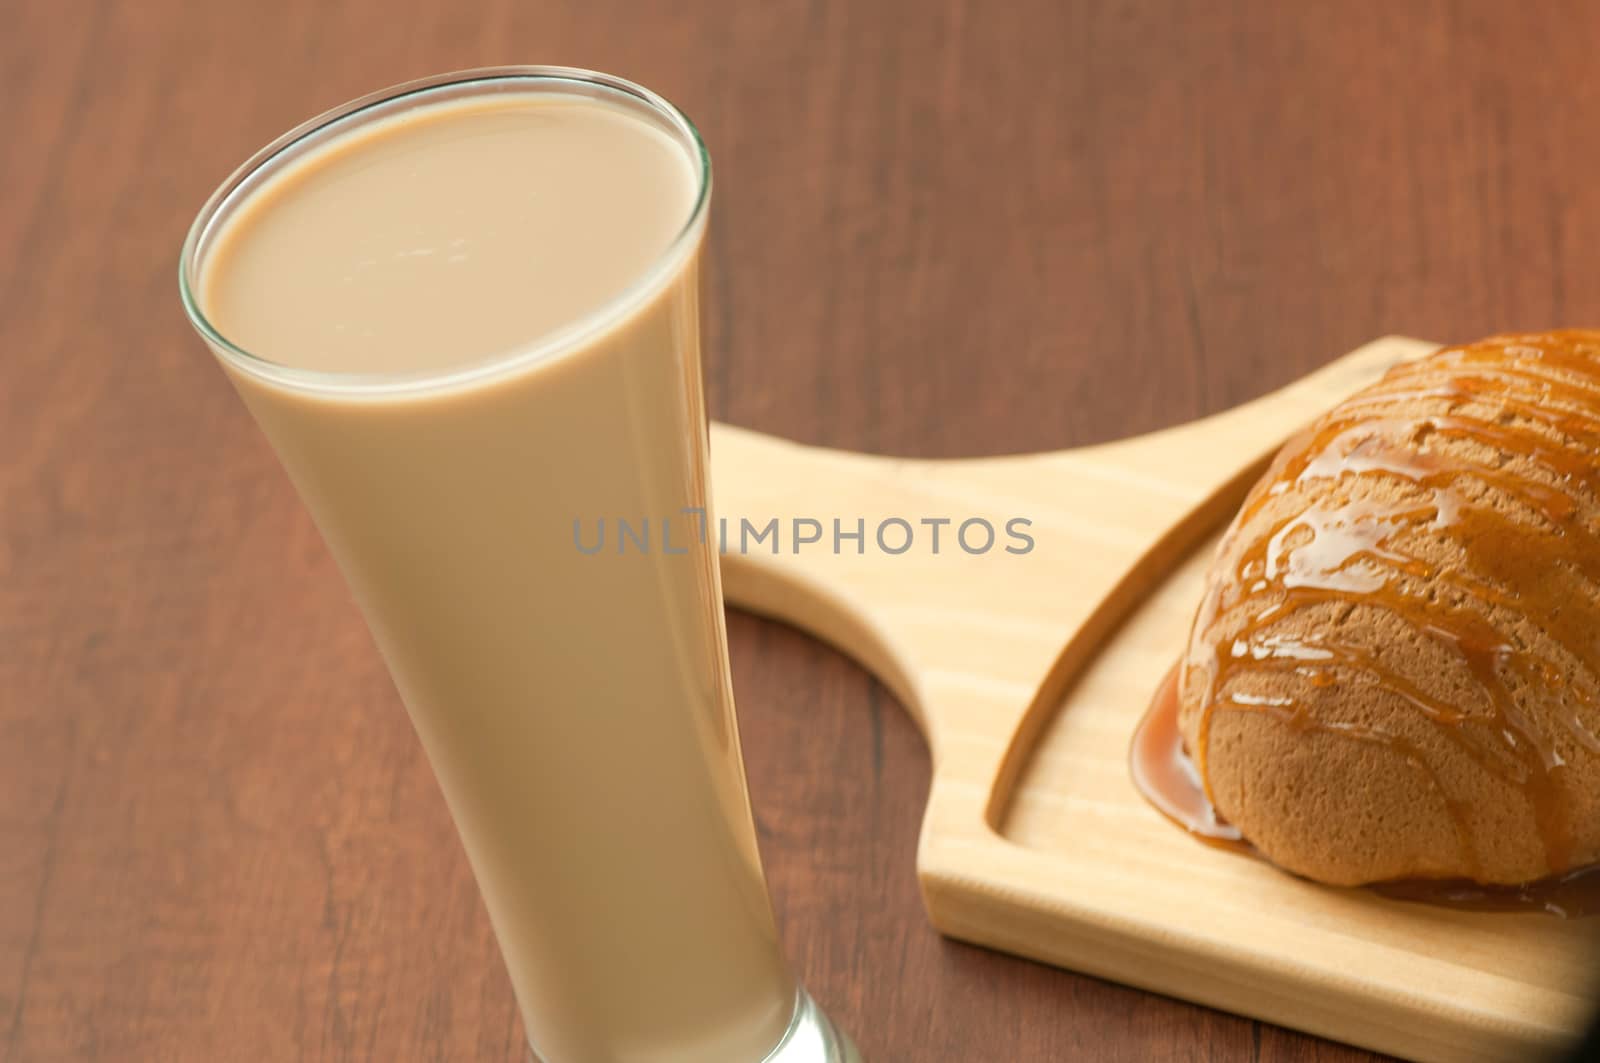 bread drizzled with honey on a wooden plate and a glass of milkshake